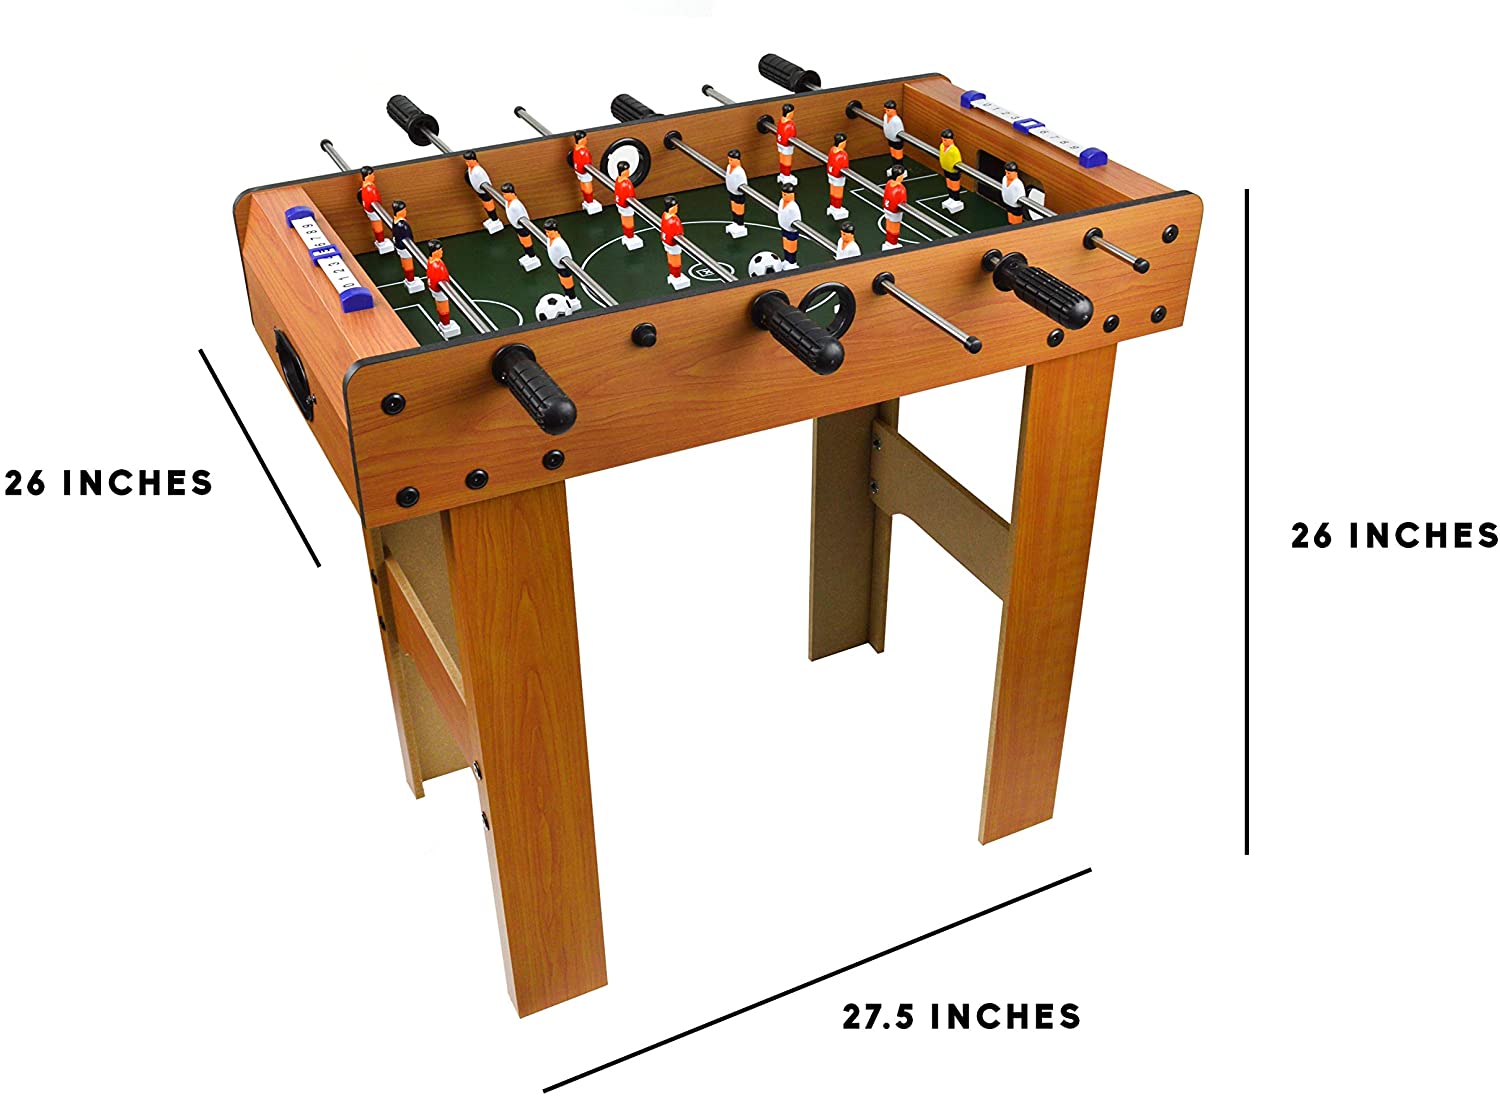 Jimmy's Toys 27'’ Foosball Table for Kids - Full Size Game Room Table for Children - image 2 of 5